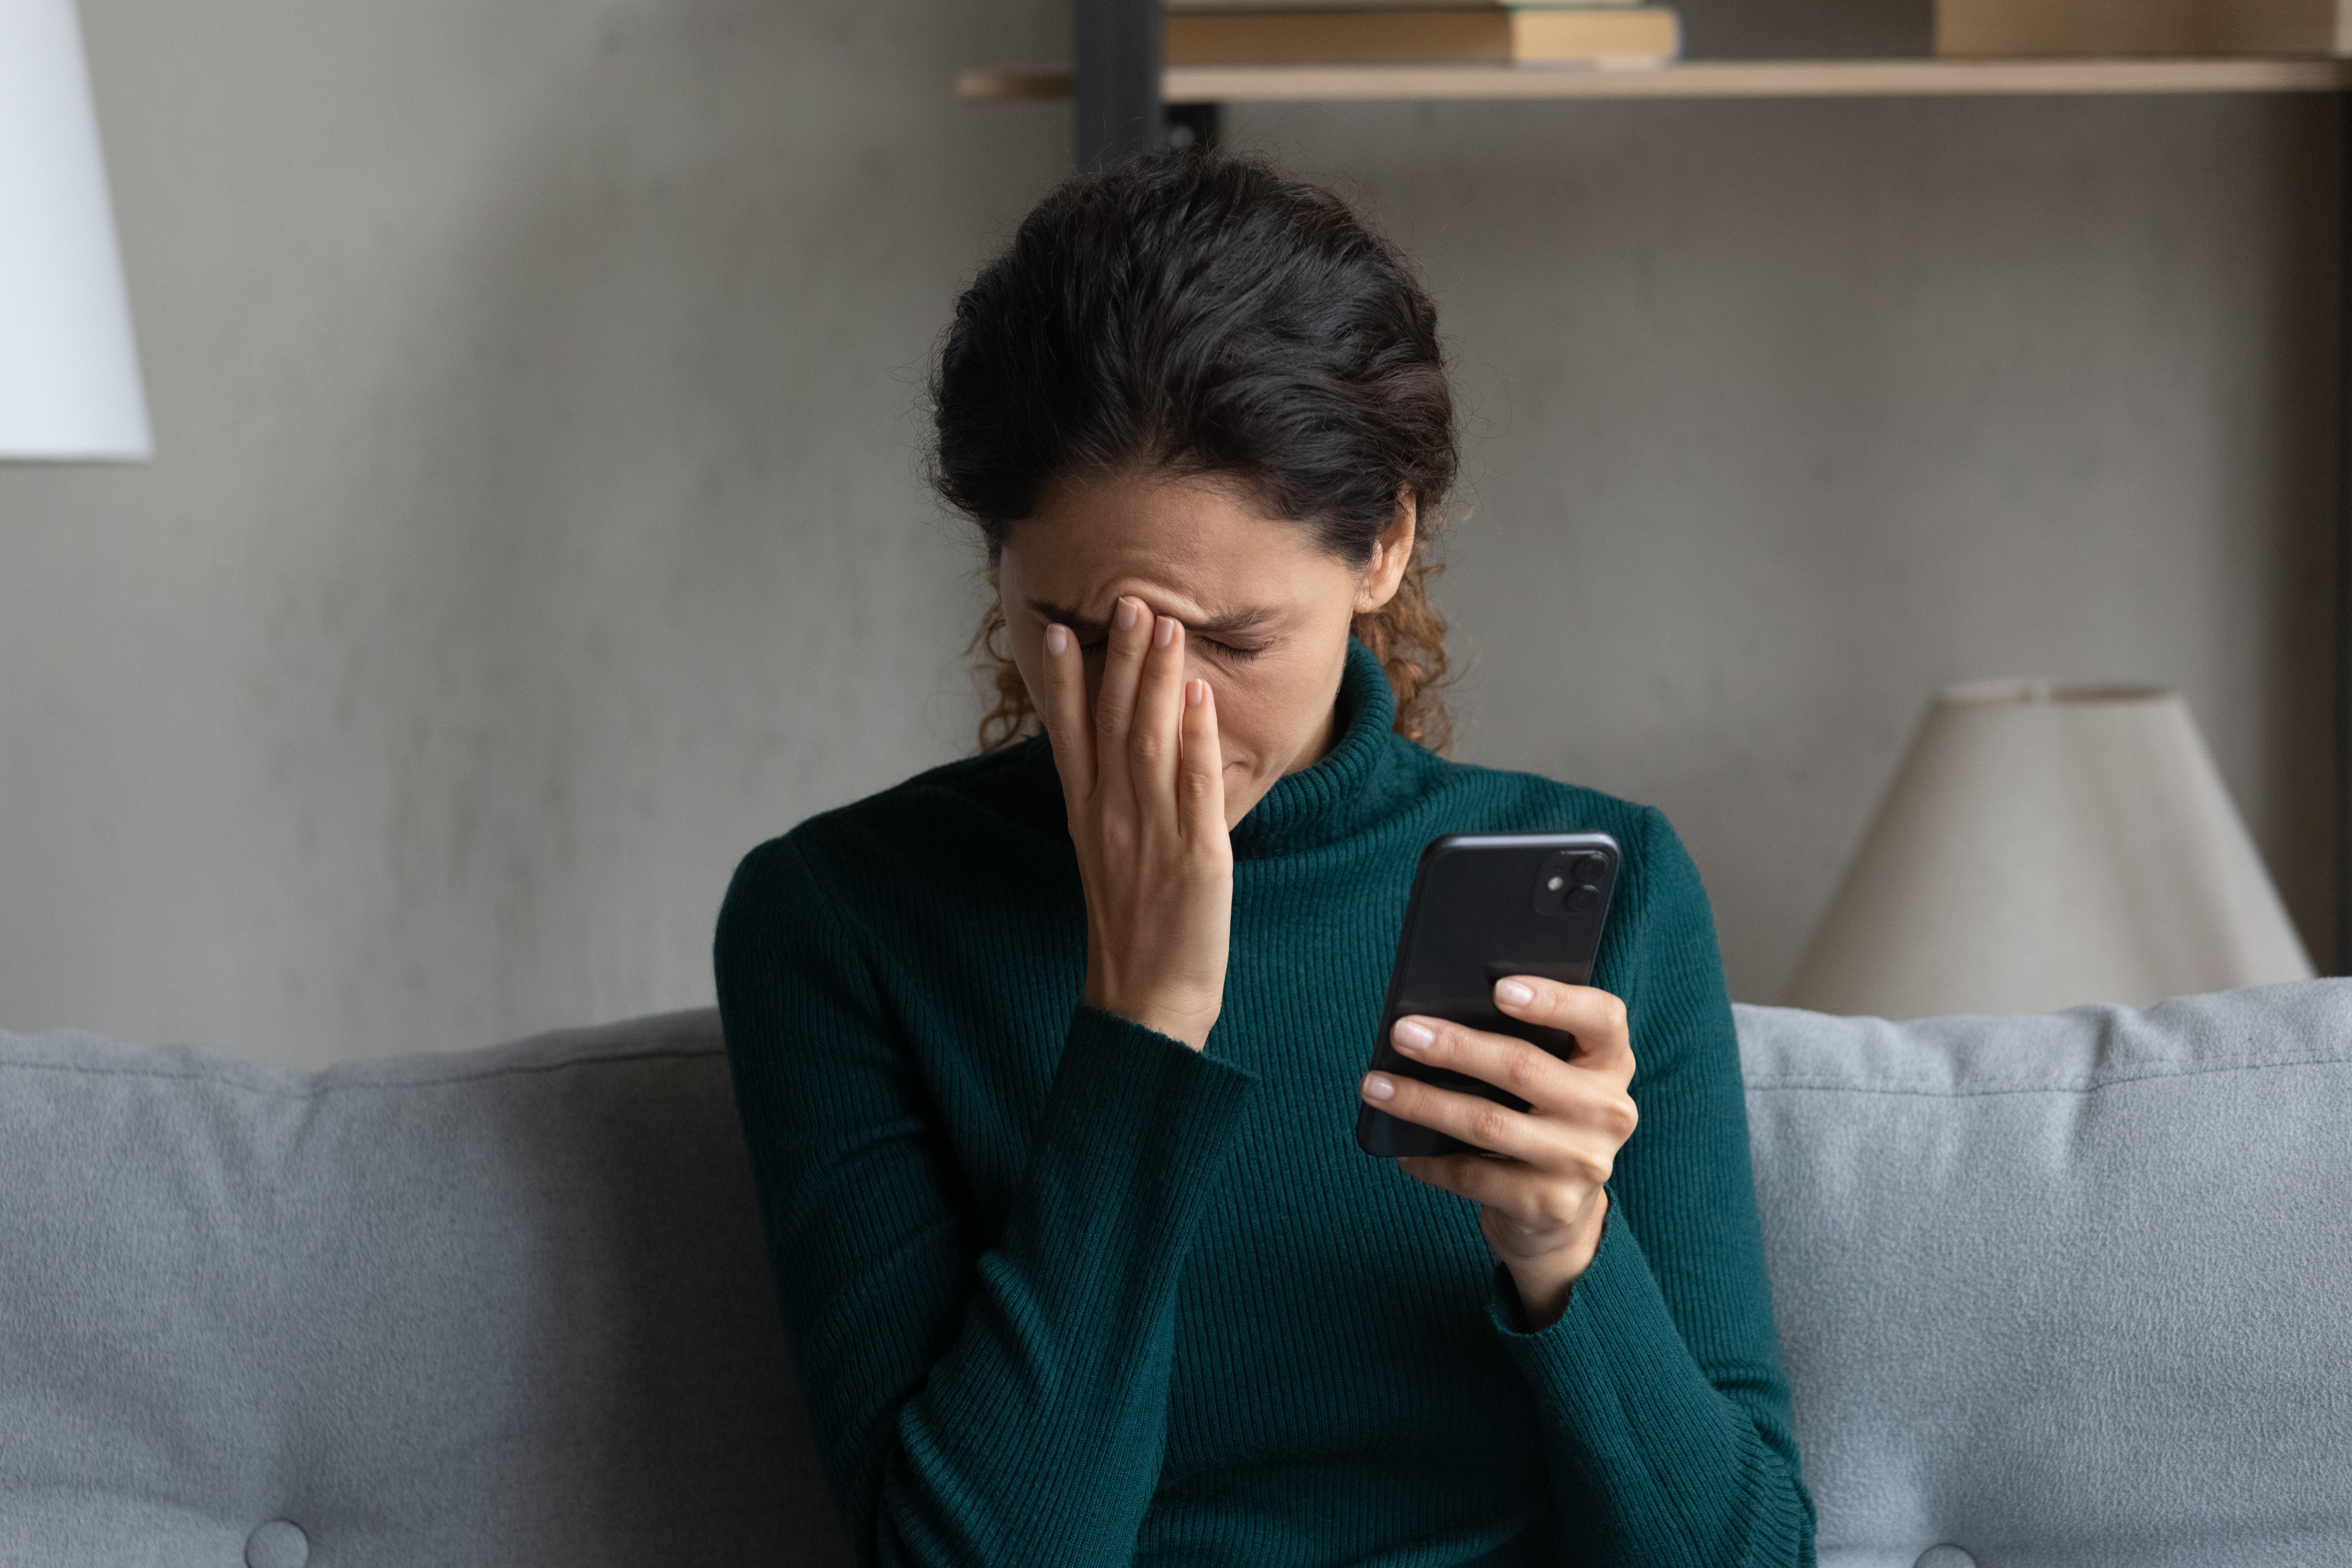 An upset woman with a phone in her hand | Source: Shutterstock